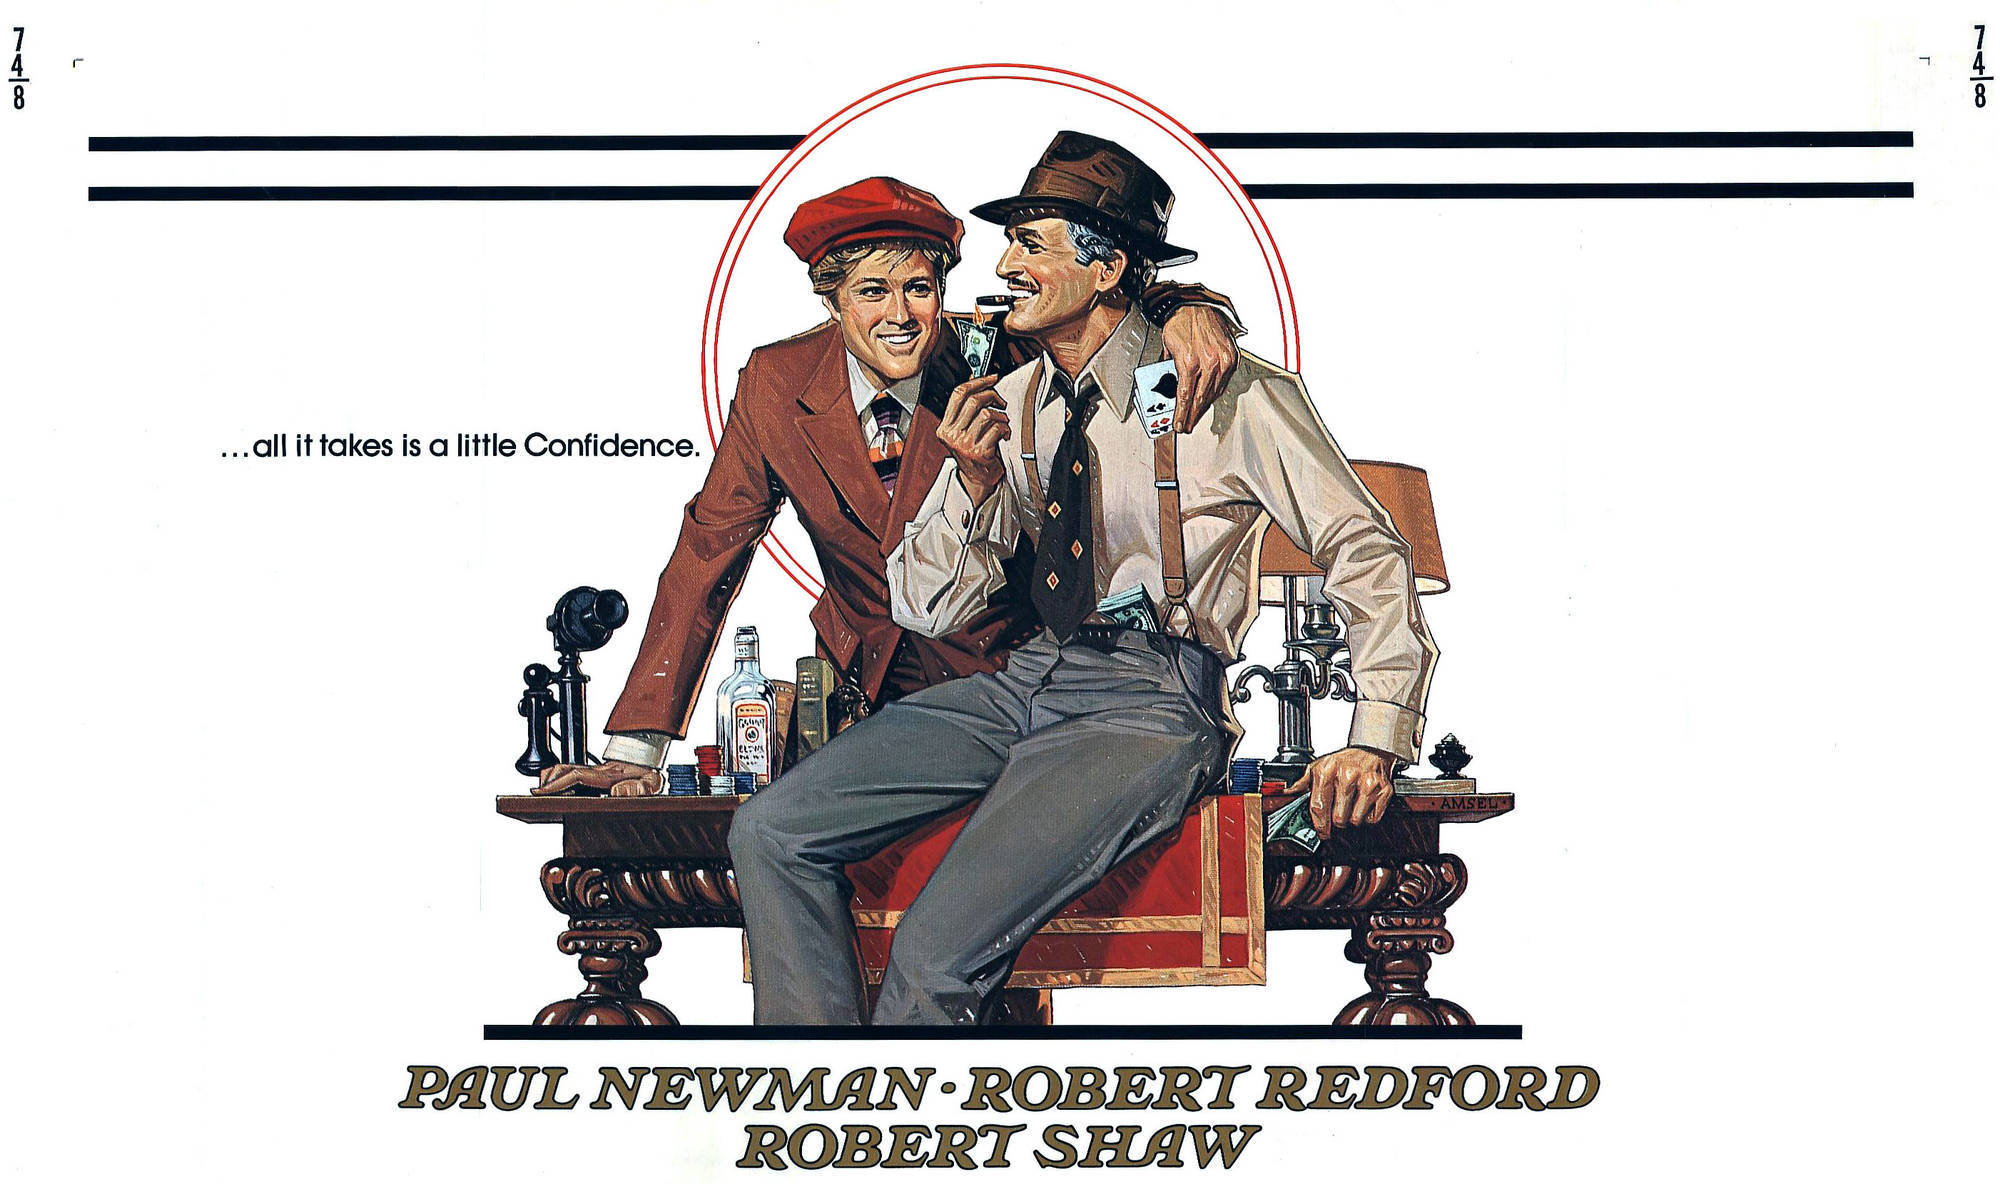 <p>People love a good con film or heist movie or caper flick. They also love Robert Redford and Paul Newman. What happens when you put that all together? You get 1973’s “The Sting.” While the movie is a throwback in many ways, it was still a big success at the time and has continued to have a fine reputation. Here are 20 facts about “The Sting,” though they might not help unravel the plot.</p>